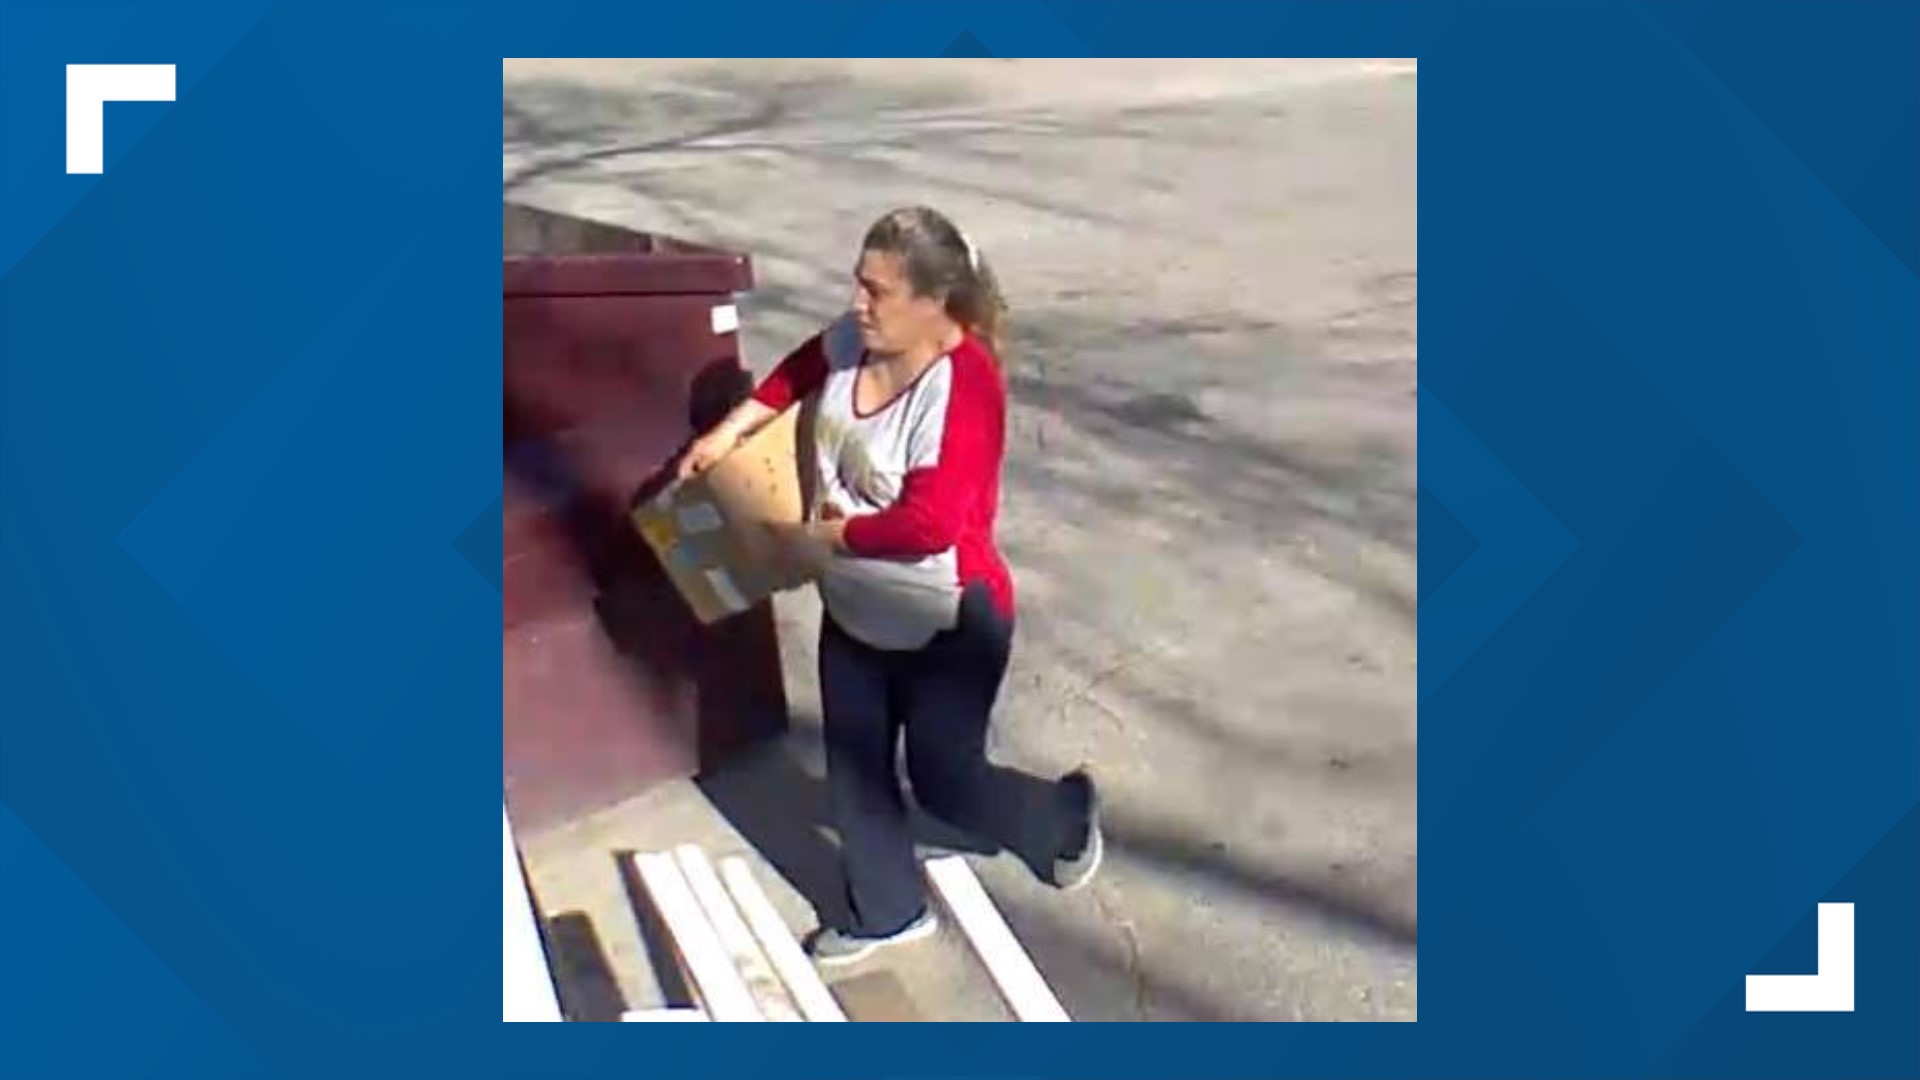 Furry Friends Refuge has asked the public to help identify the woman.